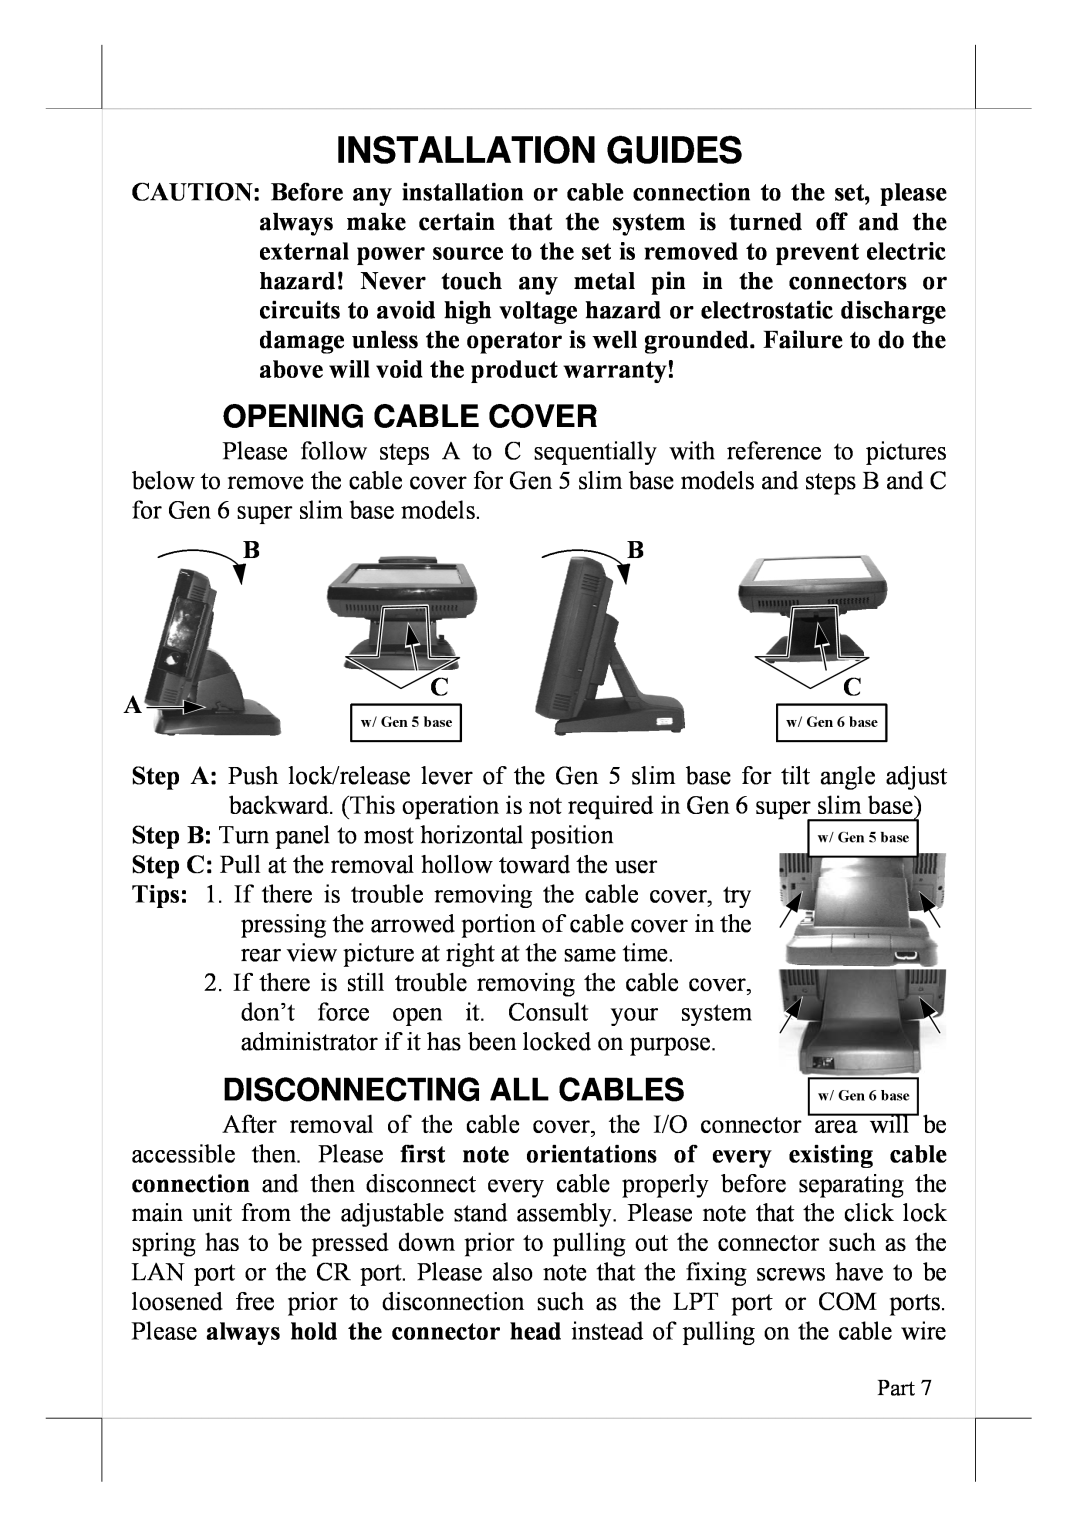 POSIFLEX Business Machines 16560900020 user manual Installation Guides, Opening Cable Cover, Disconnecting All Cables 